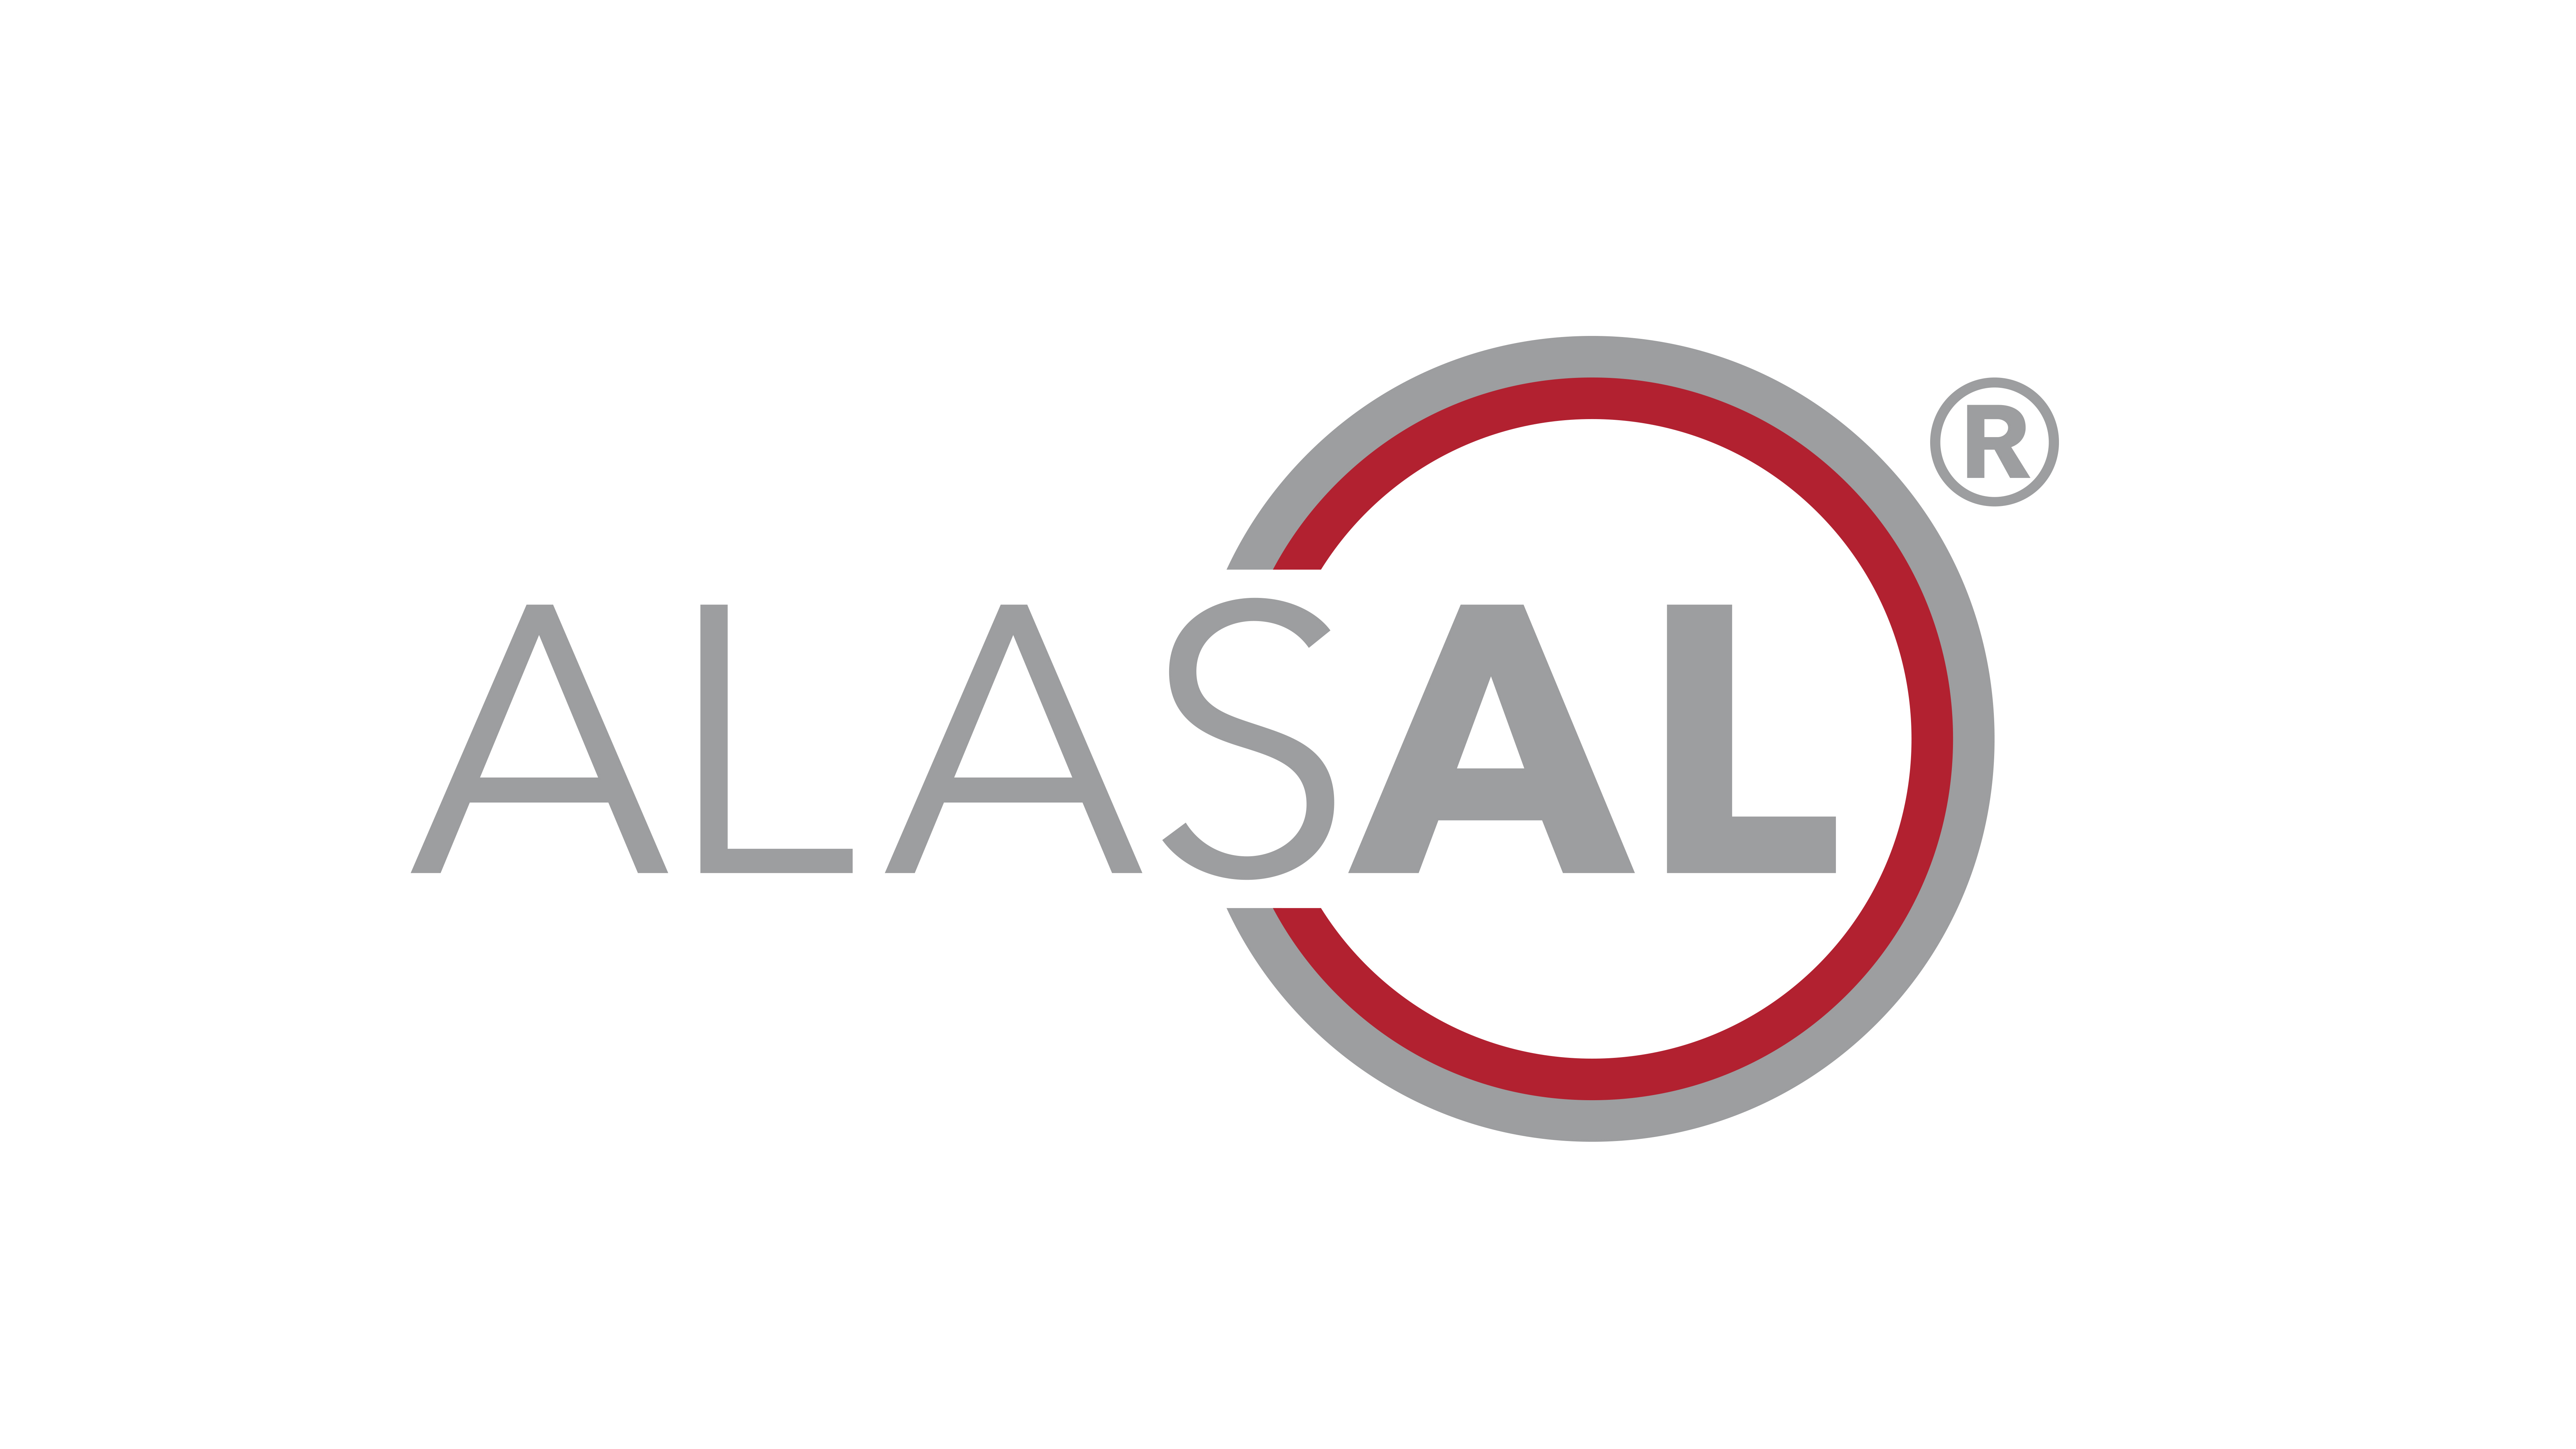 Alasal - Waste management product